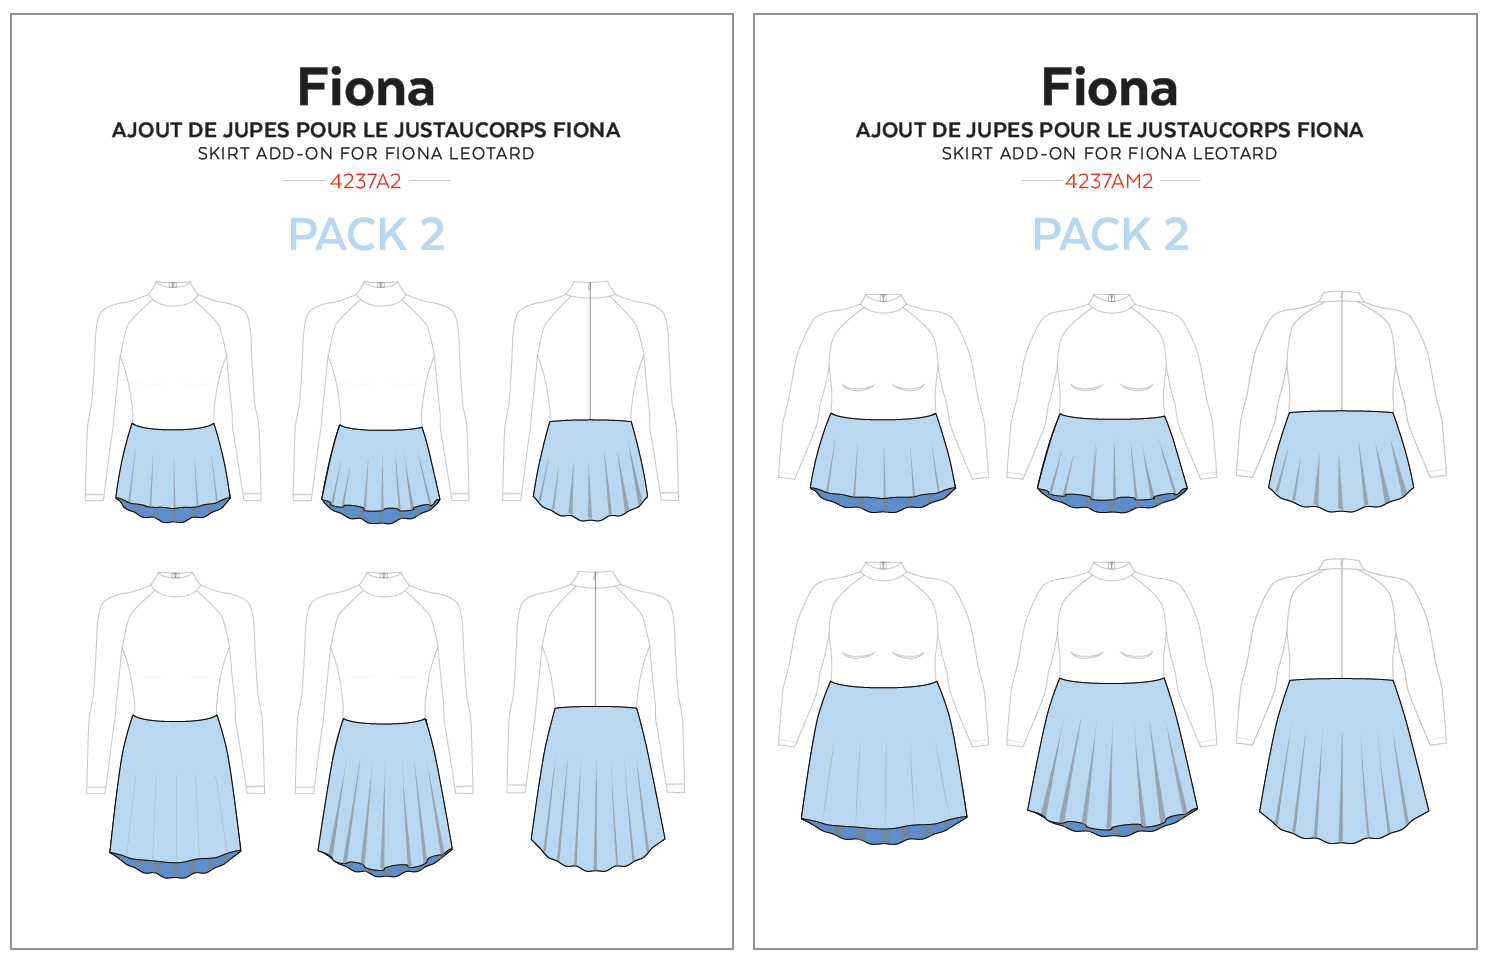 Fiona skirt add-on - Pack 2 details